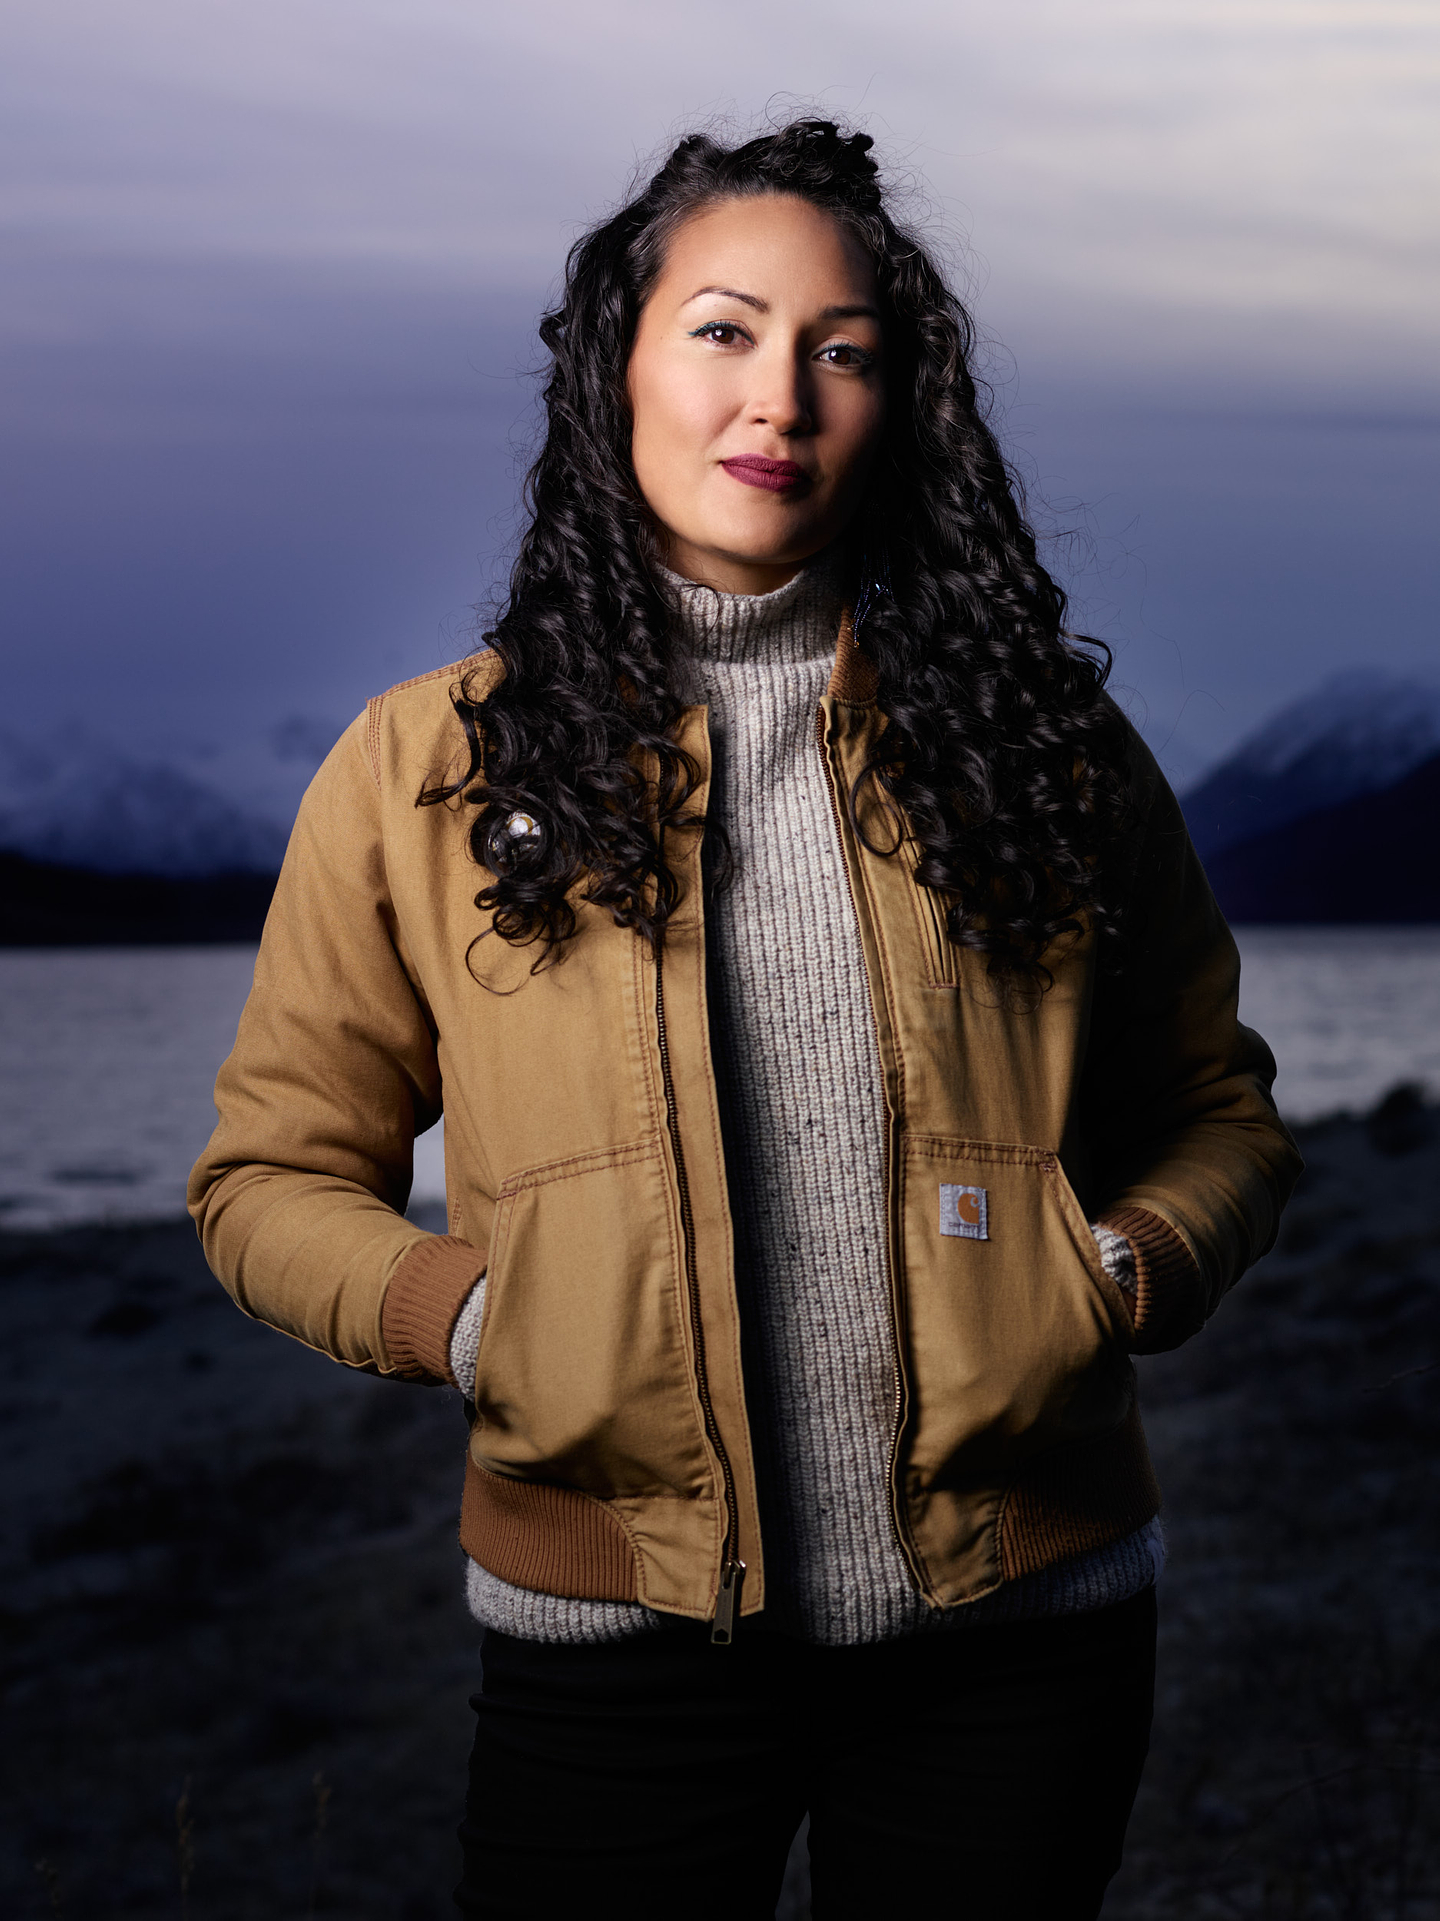 A portrait of Siku Allooloo looking directly at the camera with her hands in the pocket of her jacket. She is standing outside and a lake, snow capped mountains, and a mauve sunset can be seen in the background.